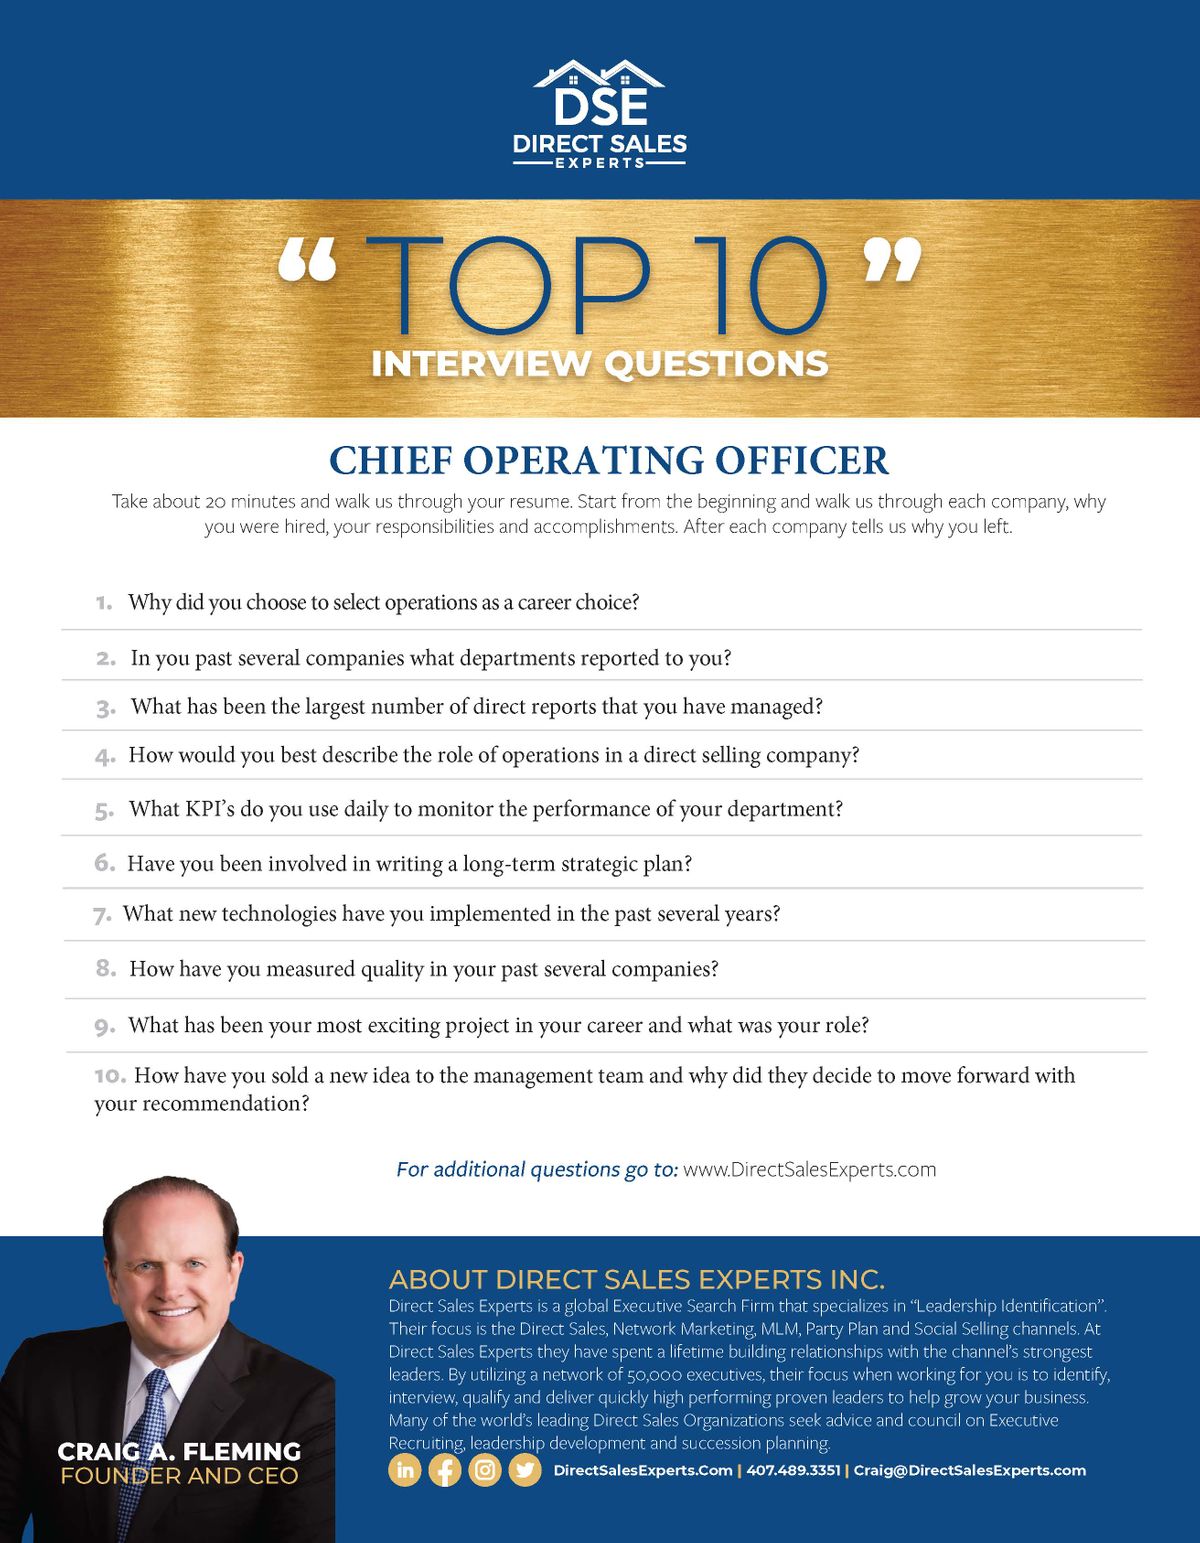 DirectSalesExperts_Top10-COO-JPEG_Page_1.jpg